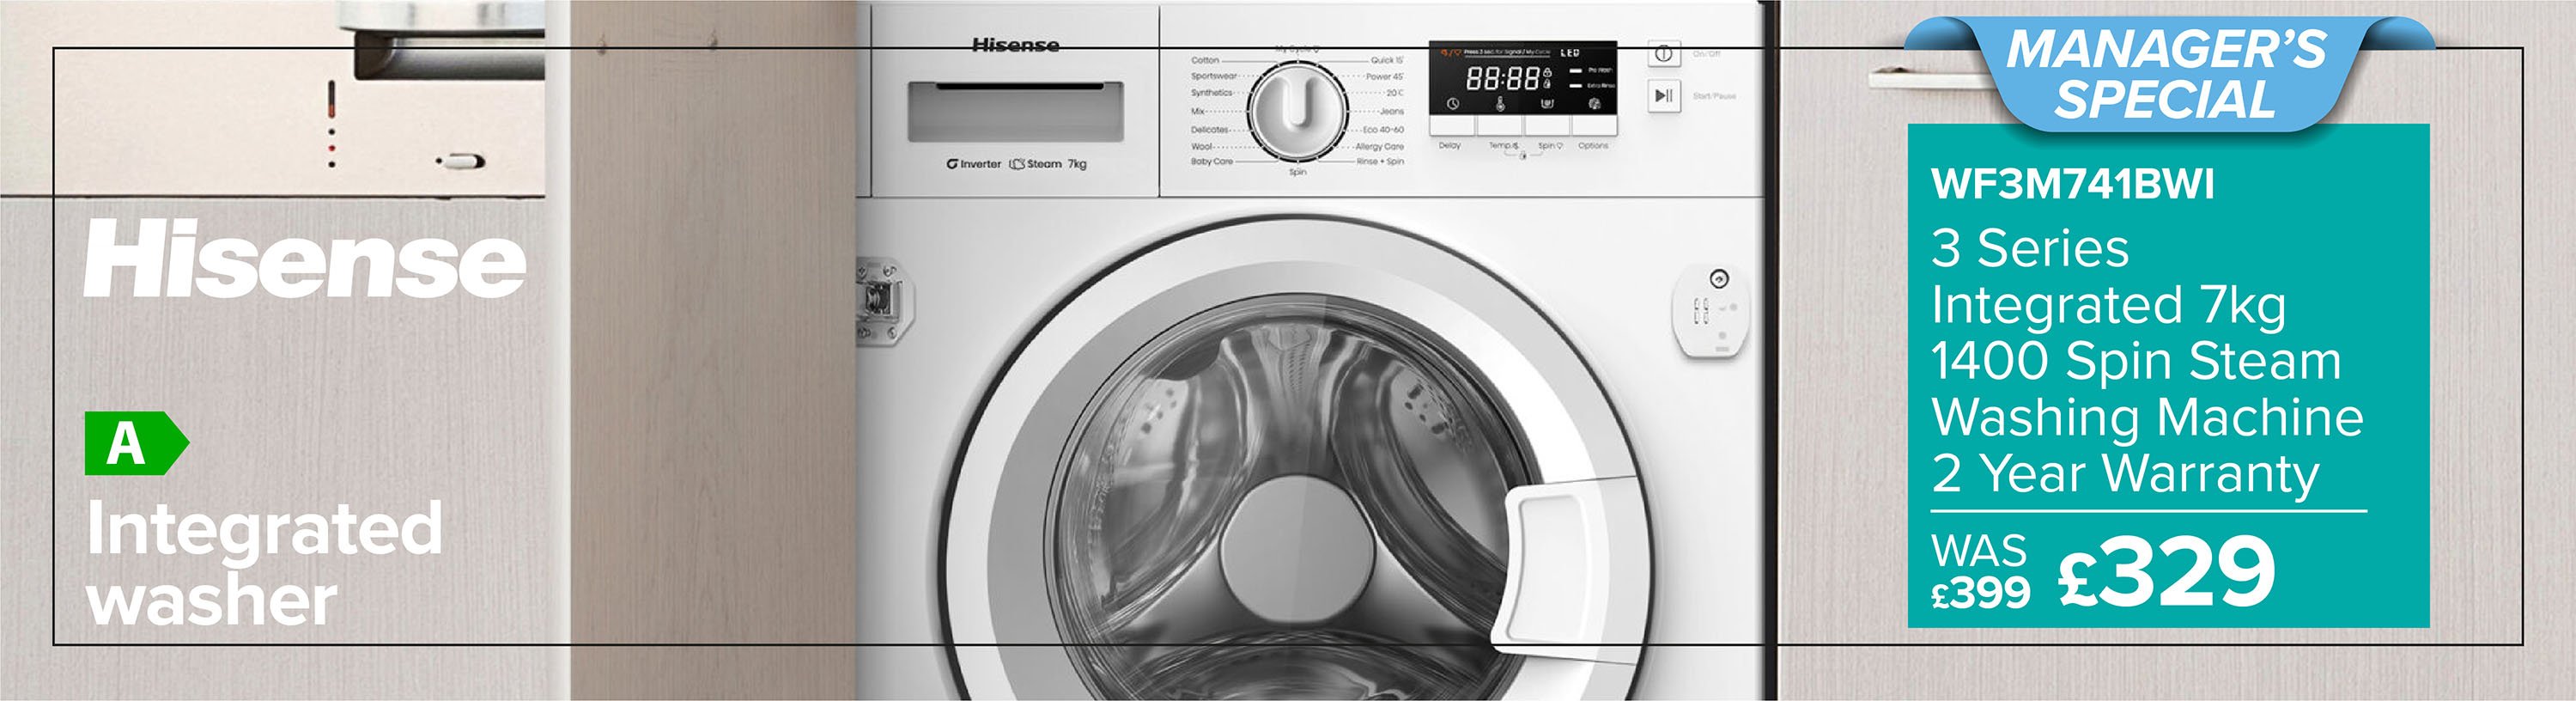 Hisense WF3M741BWI integrated washer NOW £329 was £399